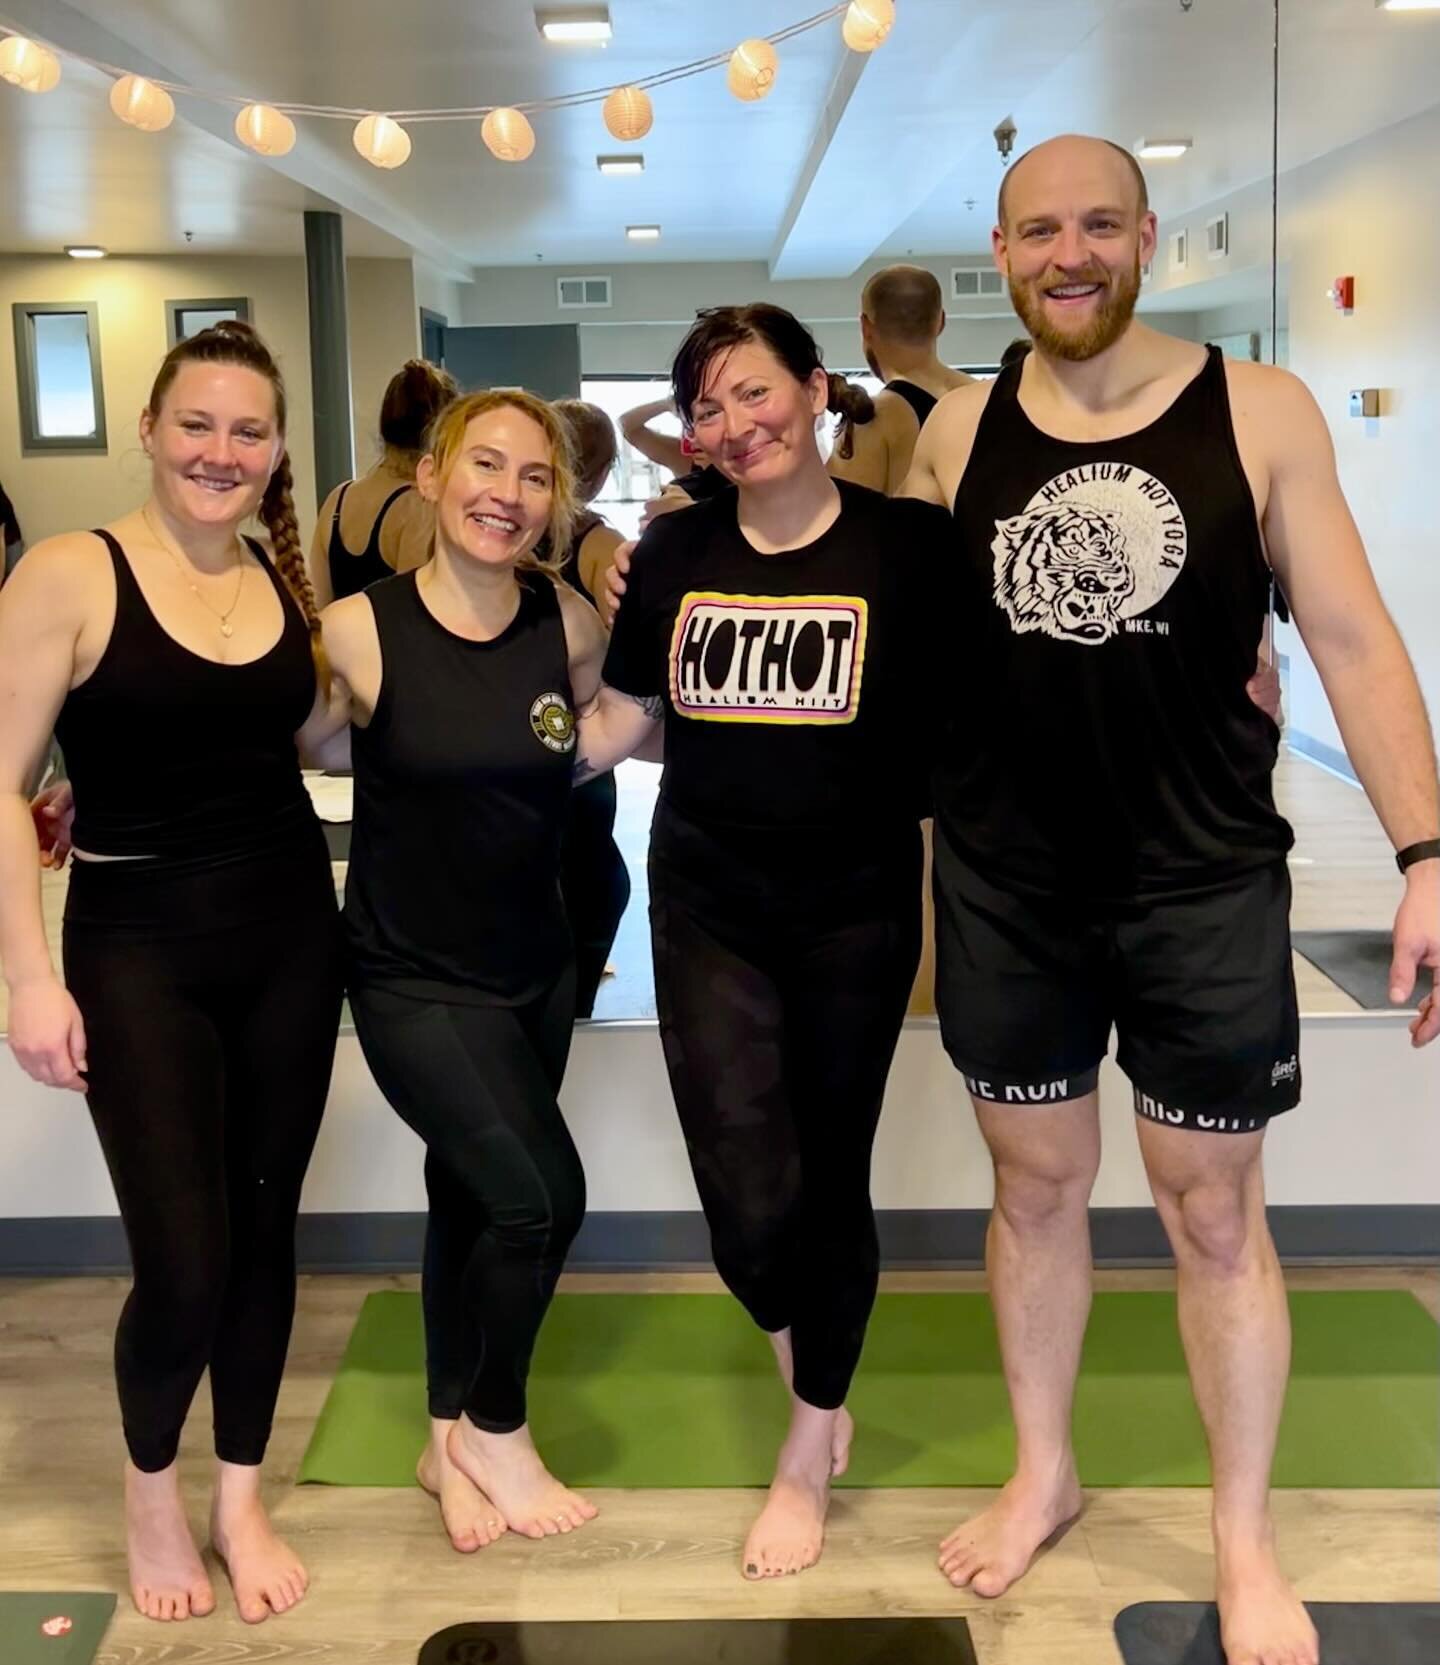 108 Sun Salutations to ring in the New Year @healiumhotyoga with this strong, FUN crew! ❤️❤️❤️ you guys! 
@ katetauschek
@spookysandwichtoo
@chrisgilbertmke